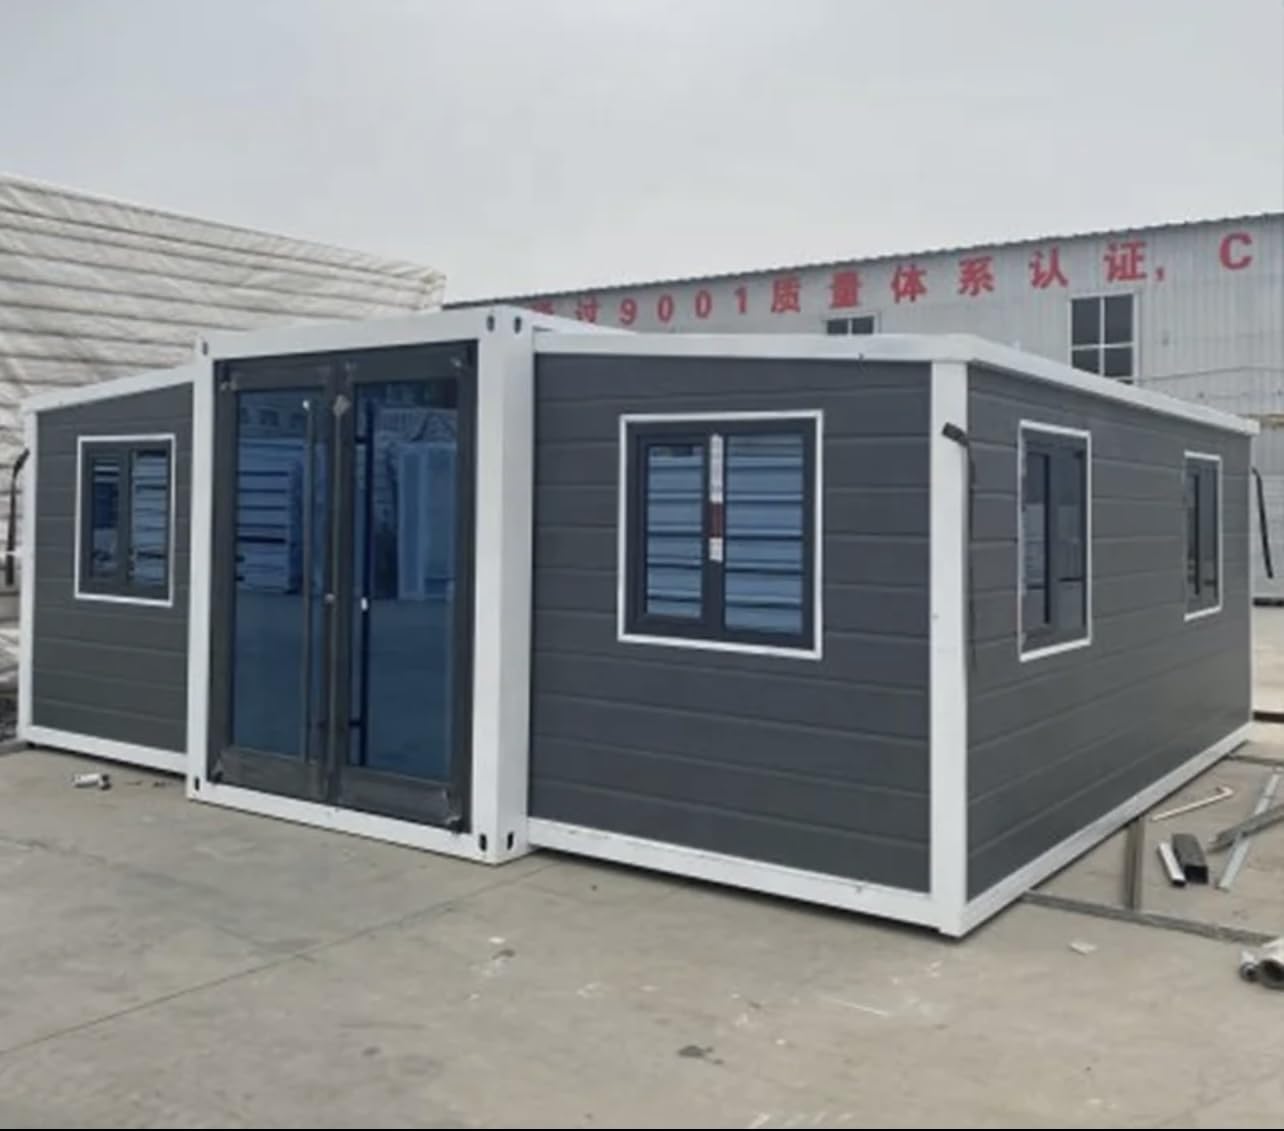 Portable Prefab House 19ft × 20ft, Expandable Tiny Houses Modern Designed Tiny House, Spacious Waterproof and Fire Proof (with Washroom)